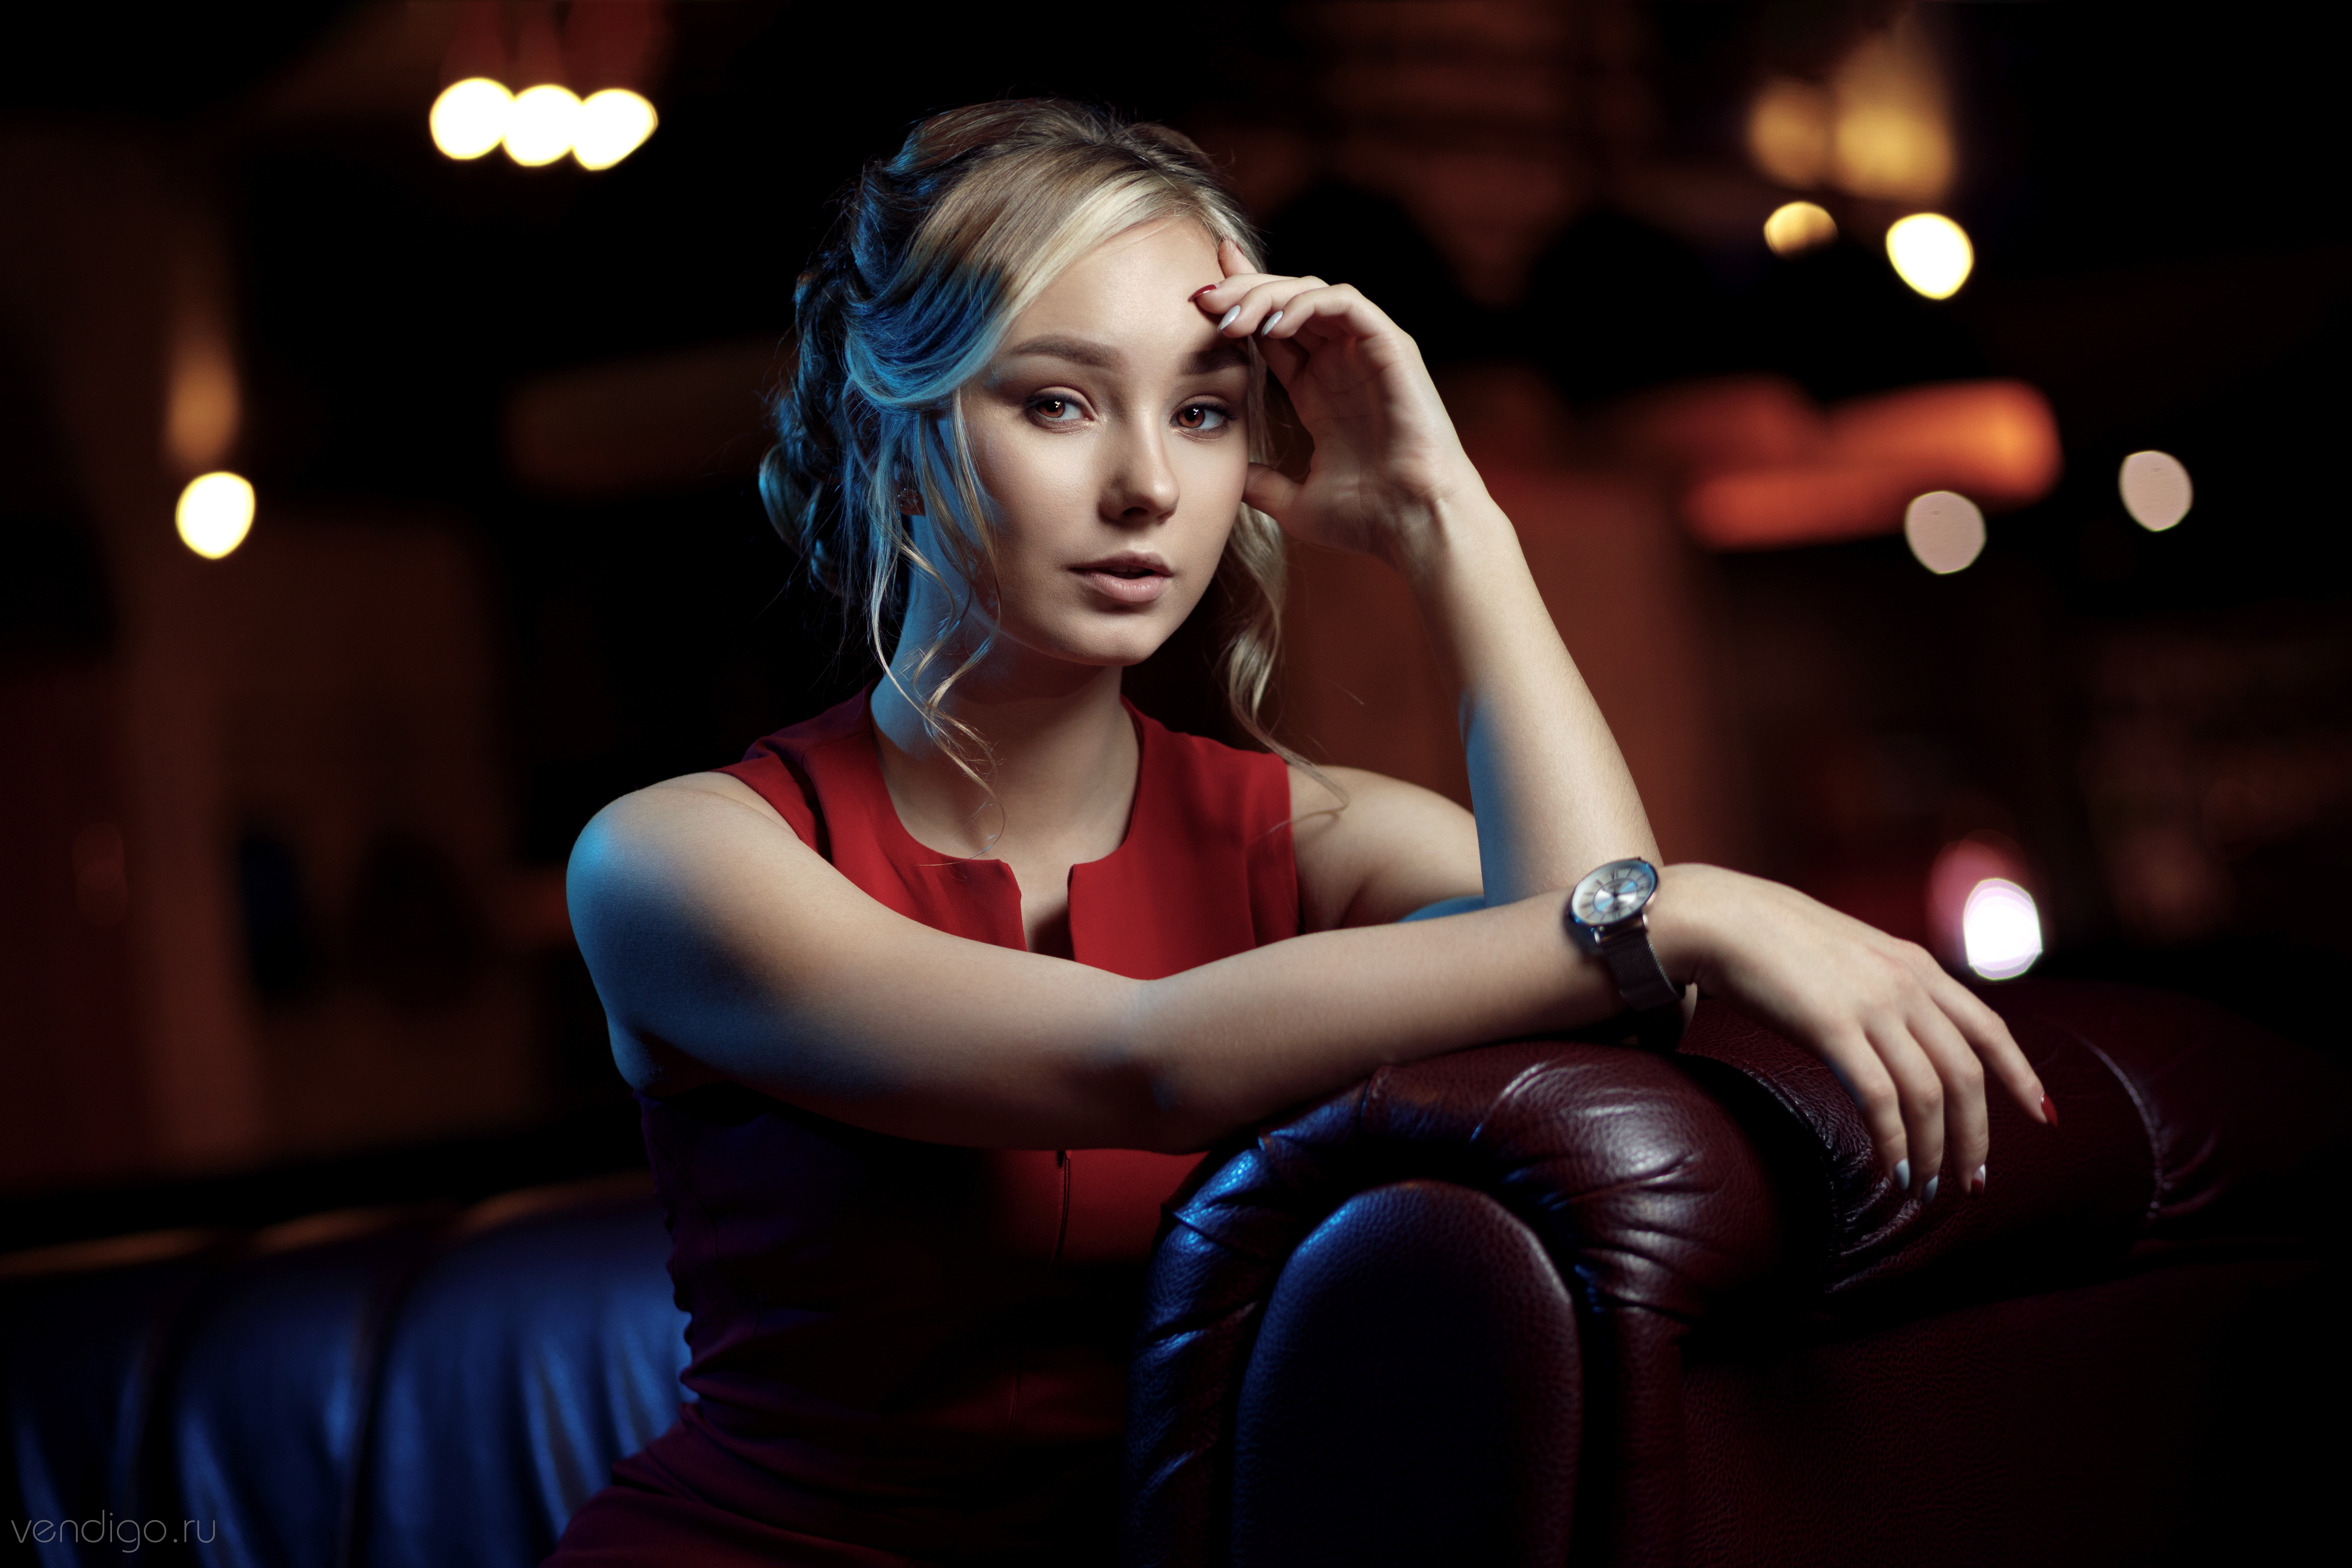 People 6720x4480 women model portrait blonde brown eyes looking at viewer hand on face red dress sitting leather couch Evgeniy Bulatov Milena